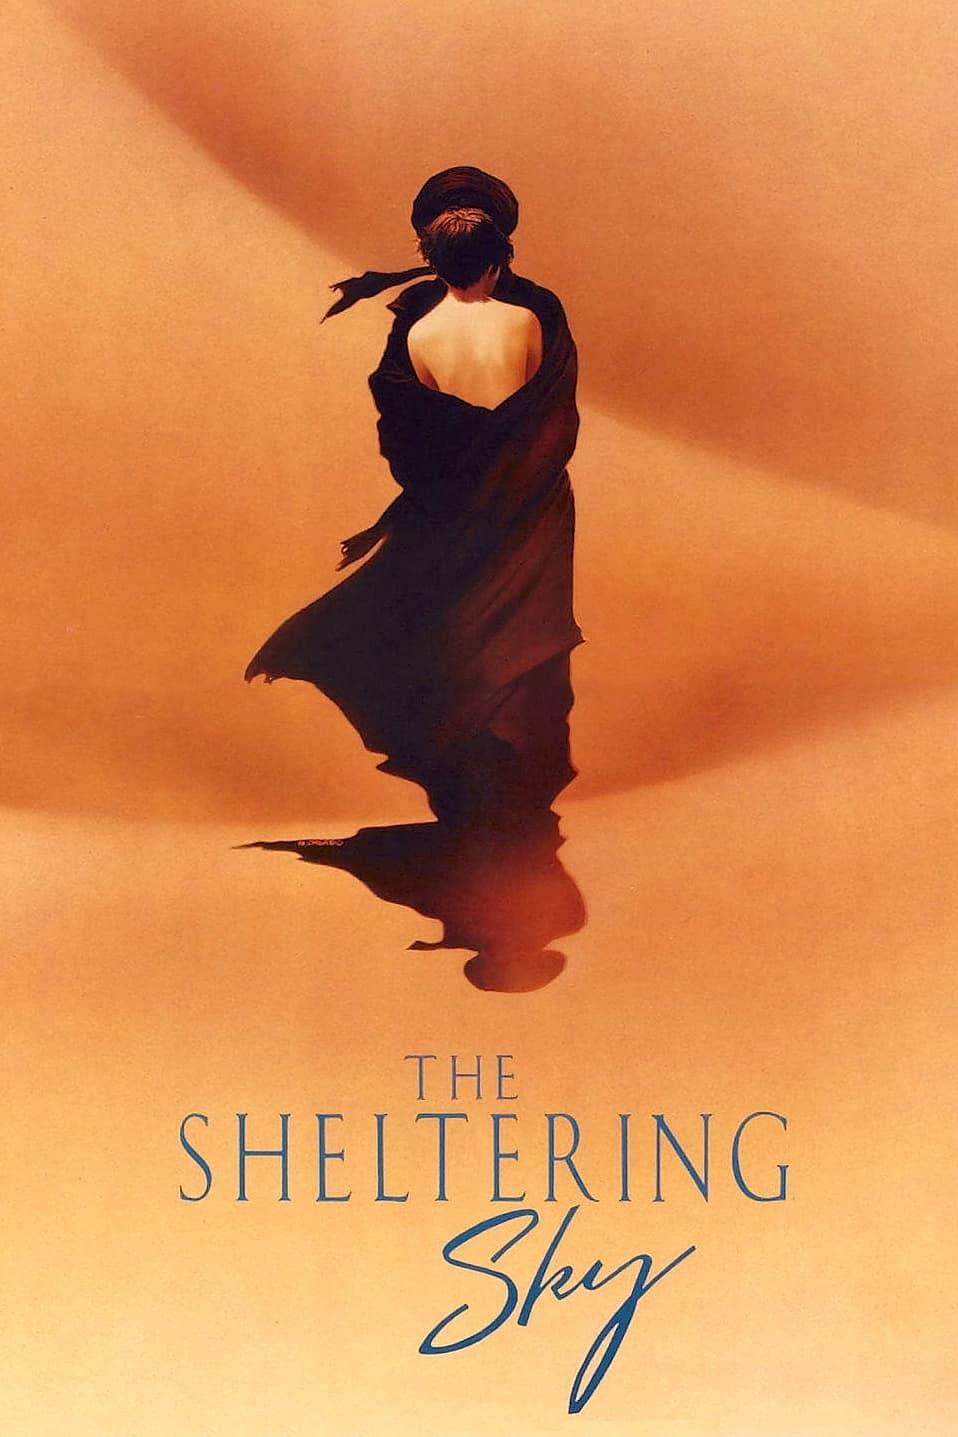 The Sheltering Sky poster